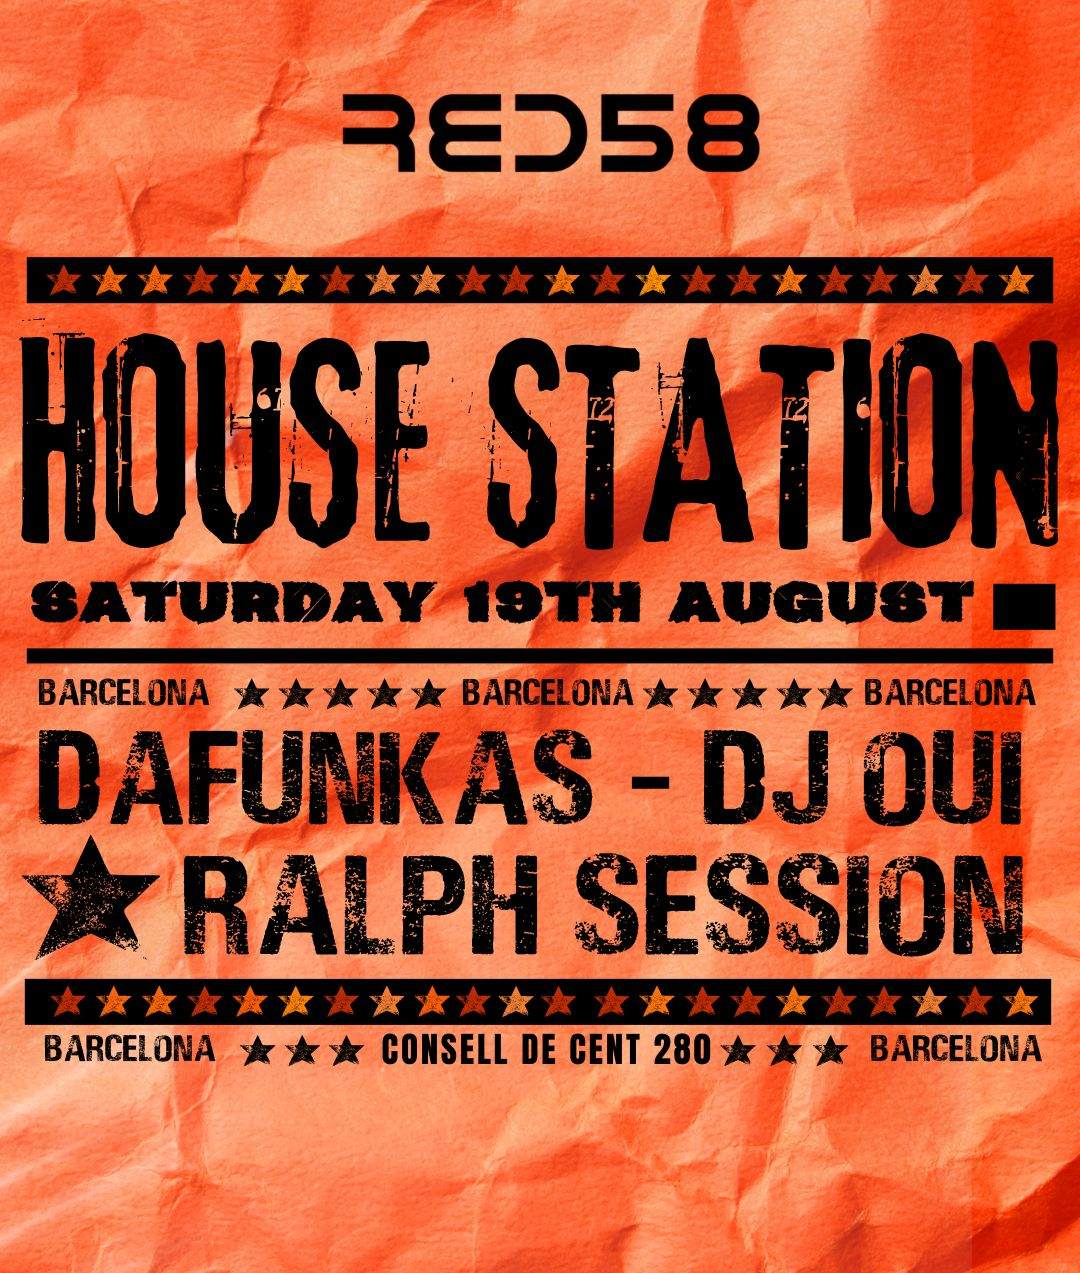 Huouse Station by day & by night: Forum Station + Red 58 Club - Página frontal